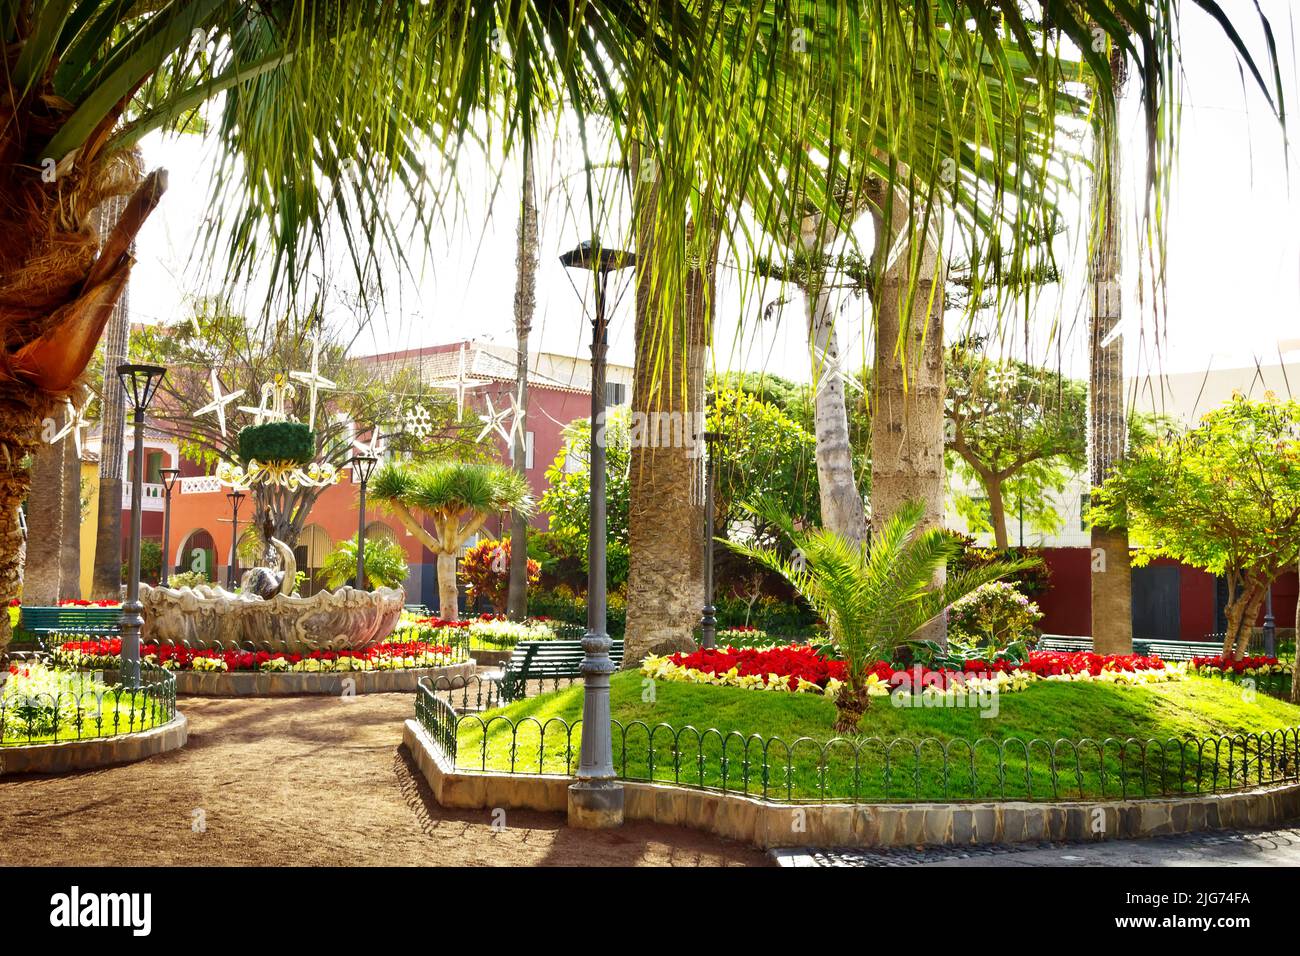 Christmas decorations and red poinsettia flowers in the park on Plaza de la Iglesia in the old town of Puerto de la Cruz, Tenerife, Canary Islands. Stock Photo